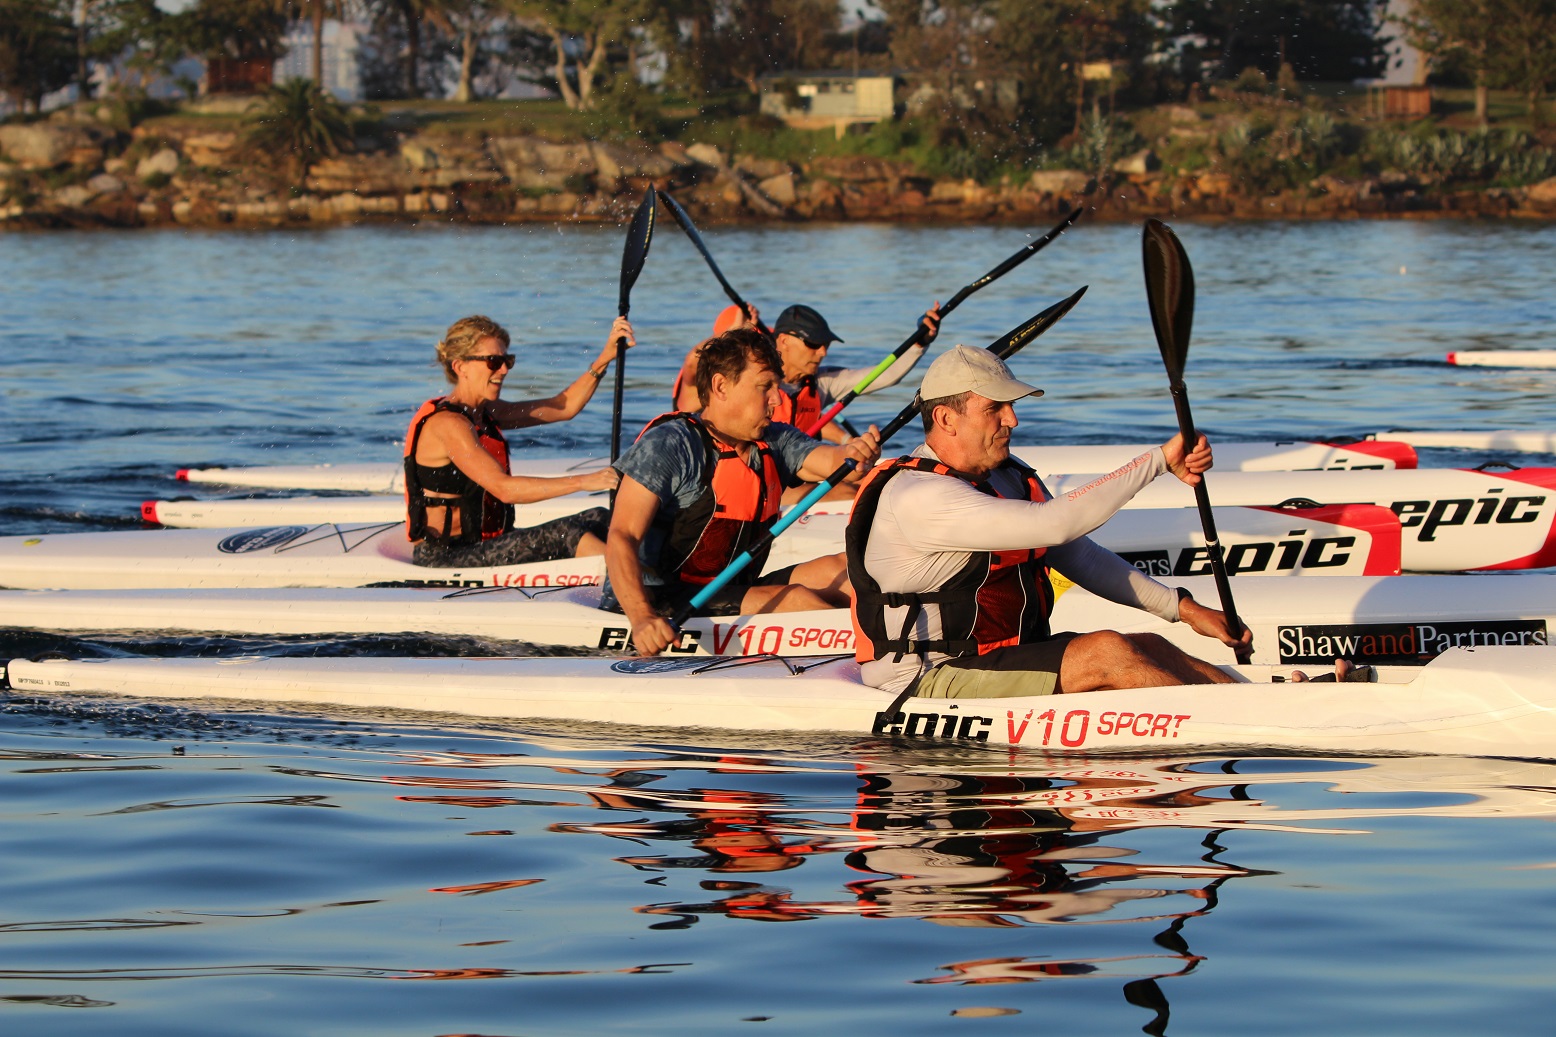 SYDNEY HARBOUR SURF CLUB operating at MH16’s Skiff Club